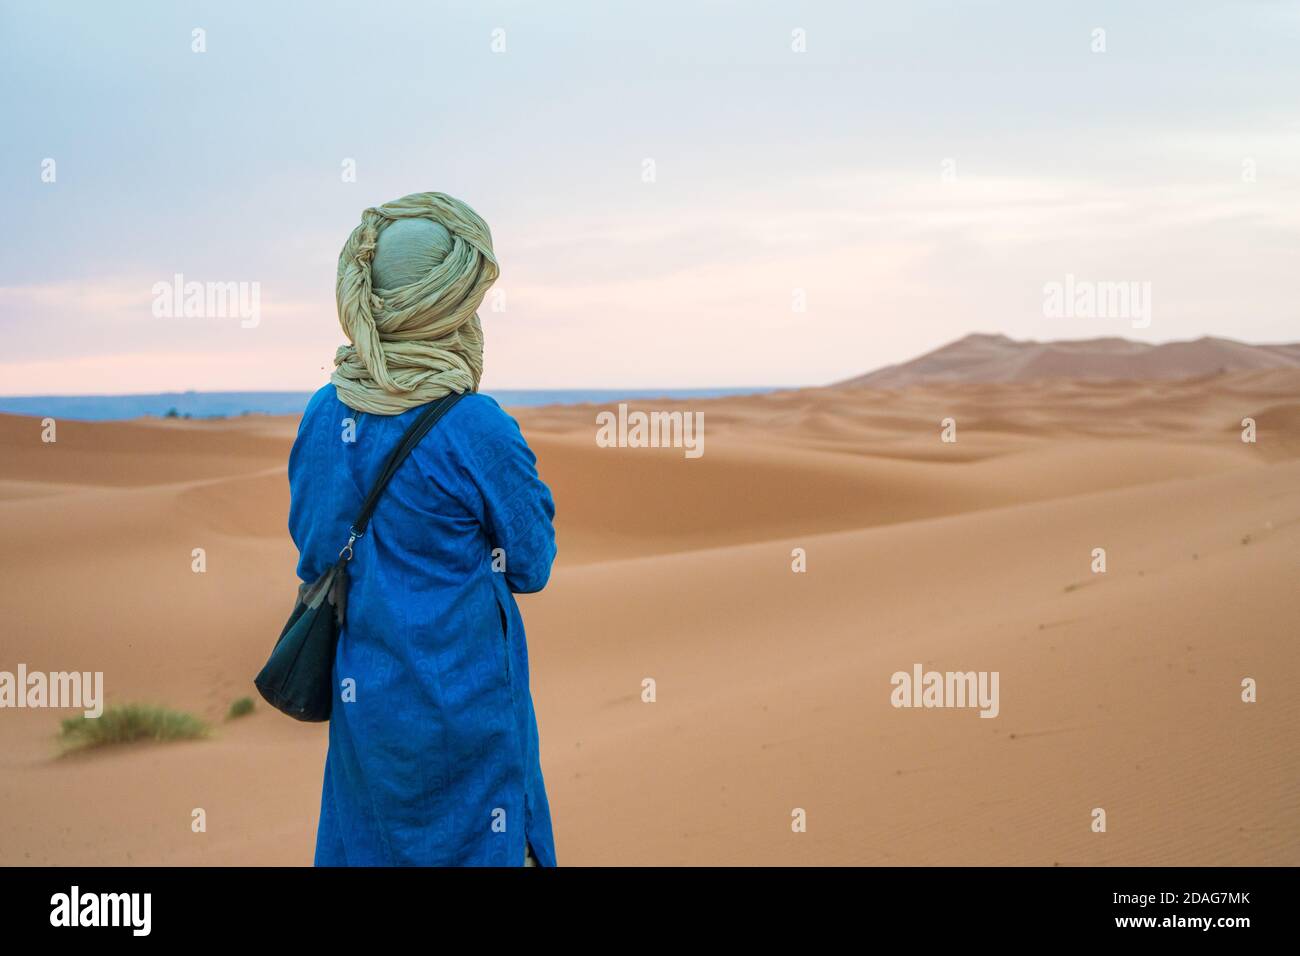 Merzouga, Morocco - APRIL 29 2019: Traditionally dressed Moroccan standing with the back to the camera and watching the Sahara Desert Stock Photo